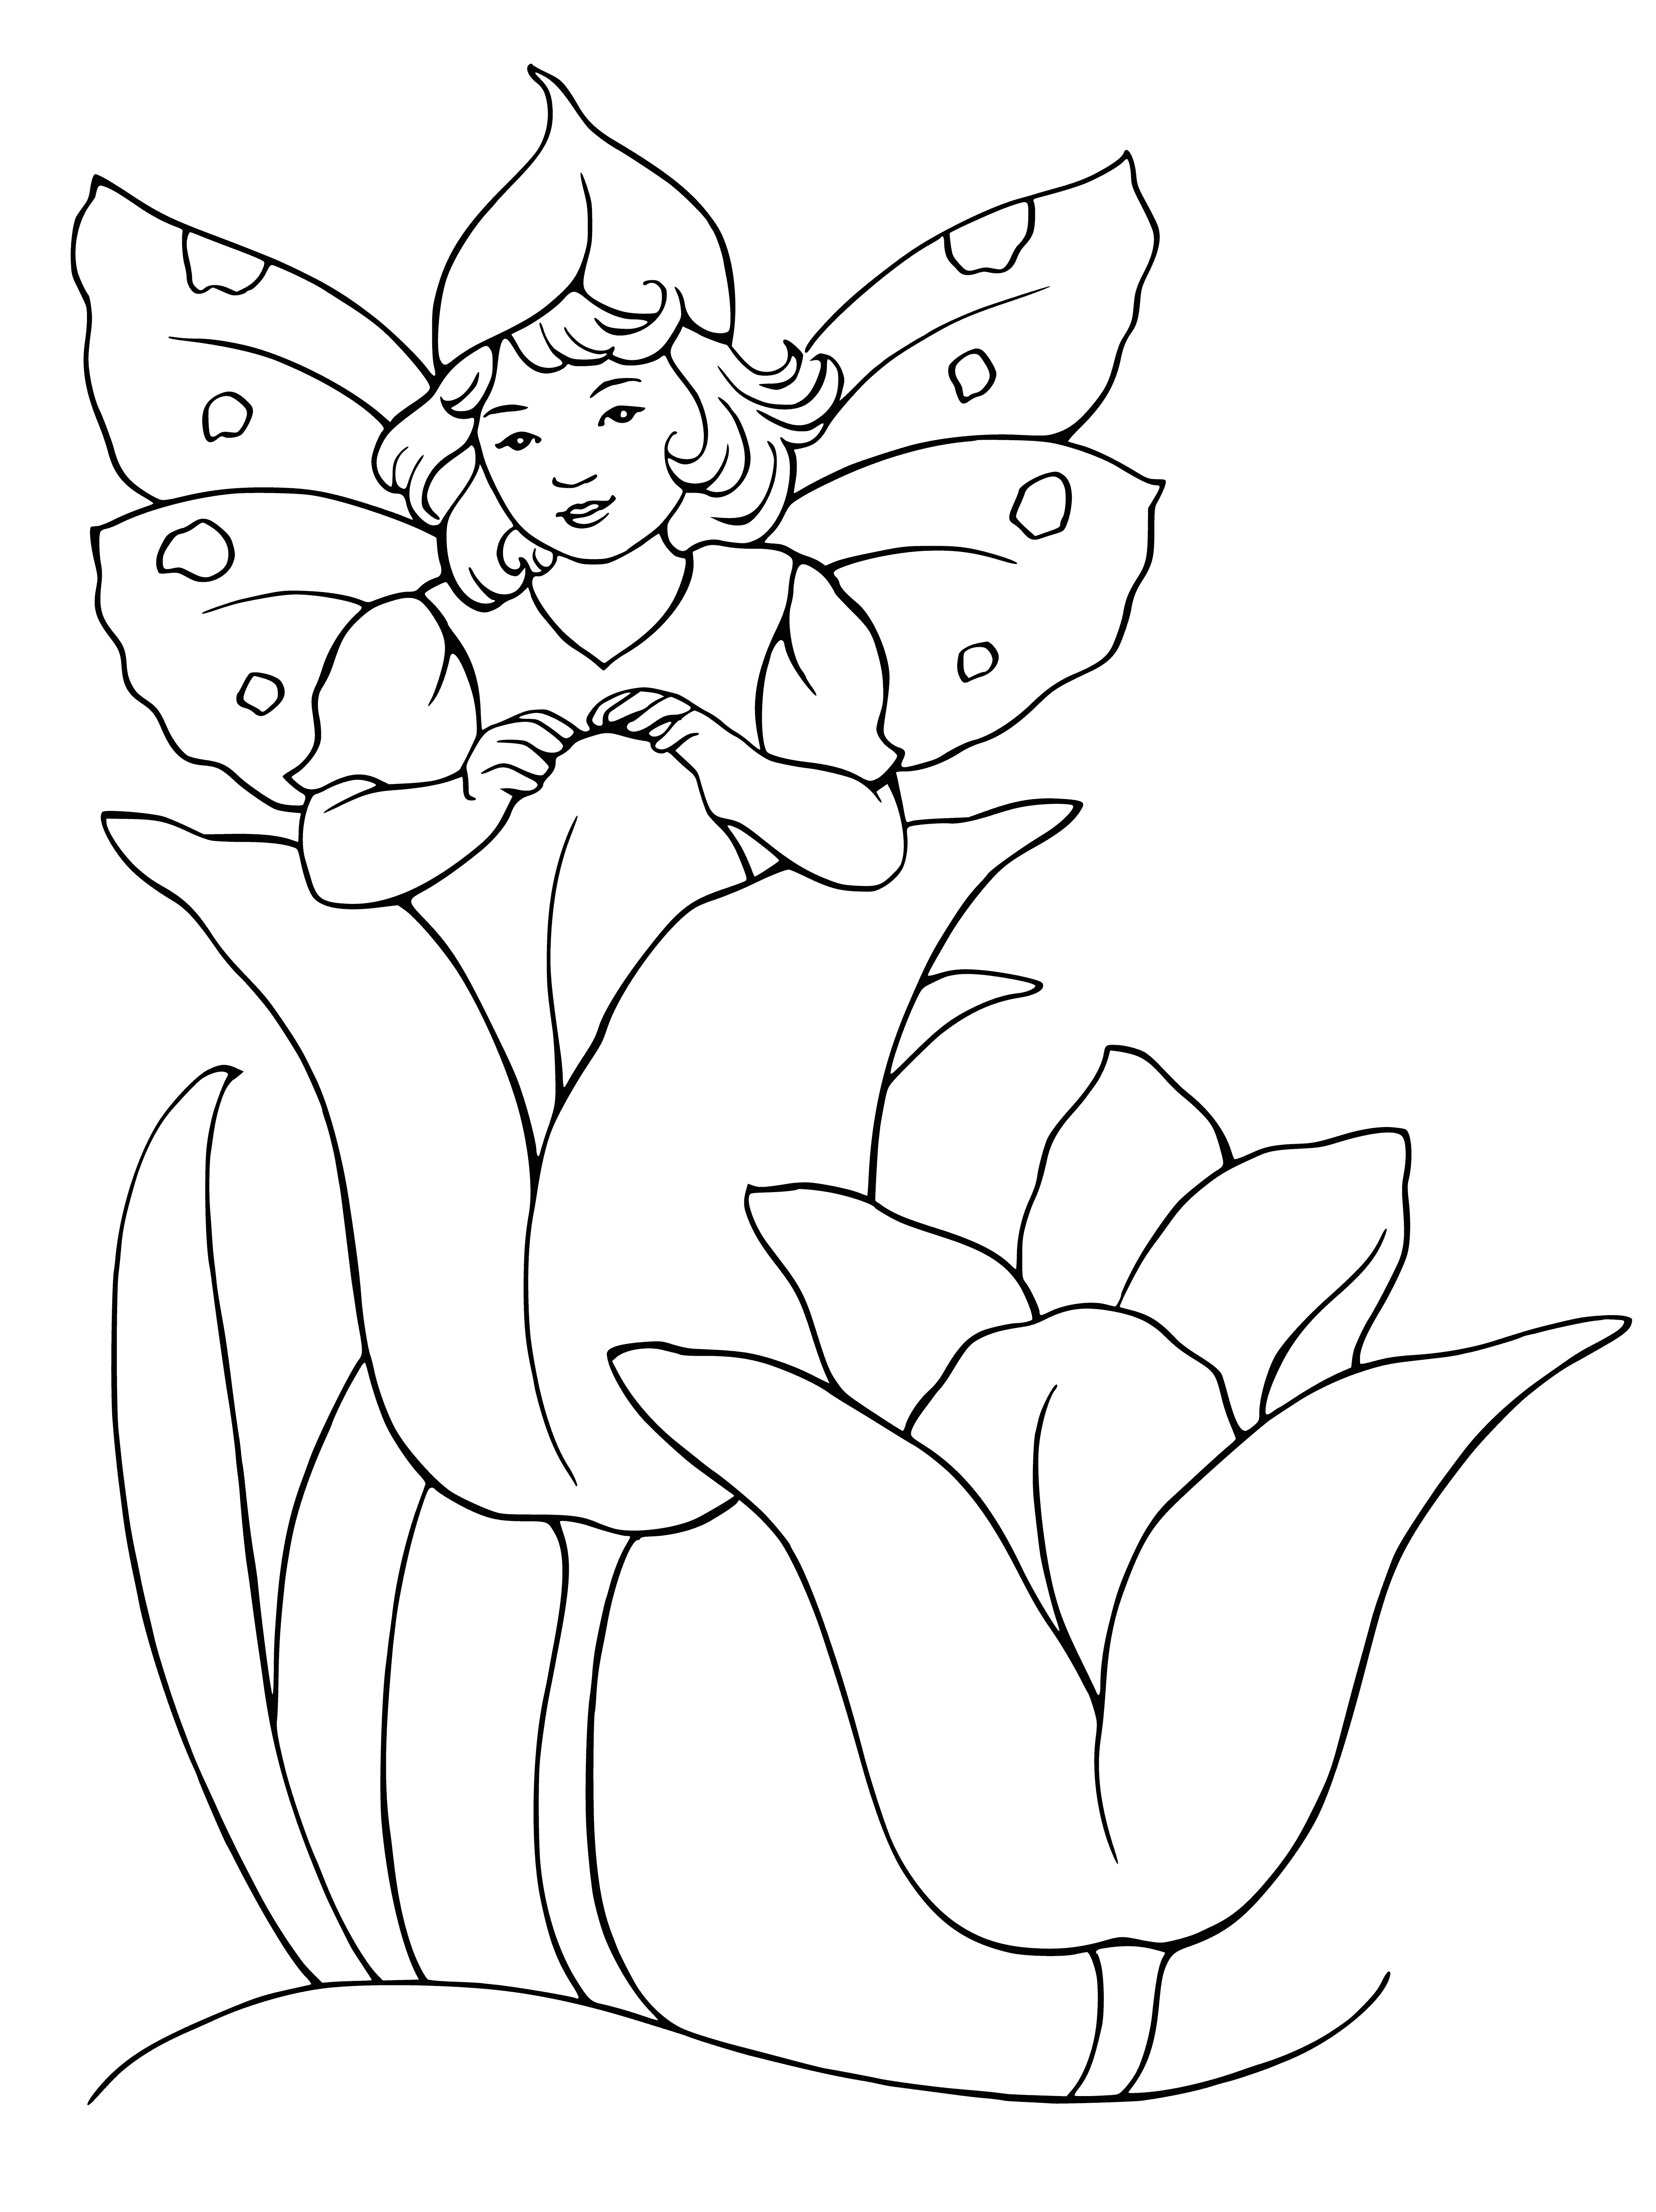 Fairy in a flower coloring page